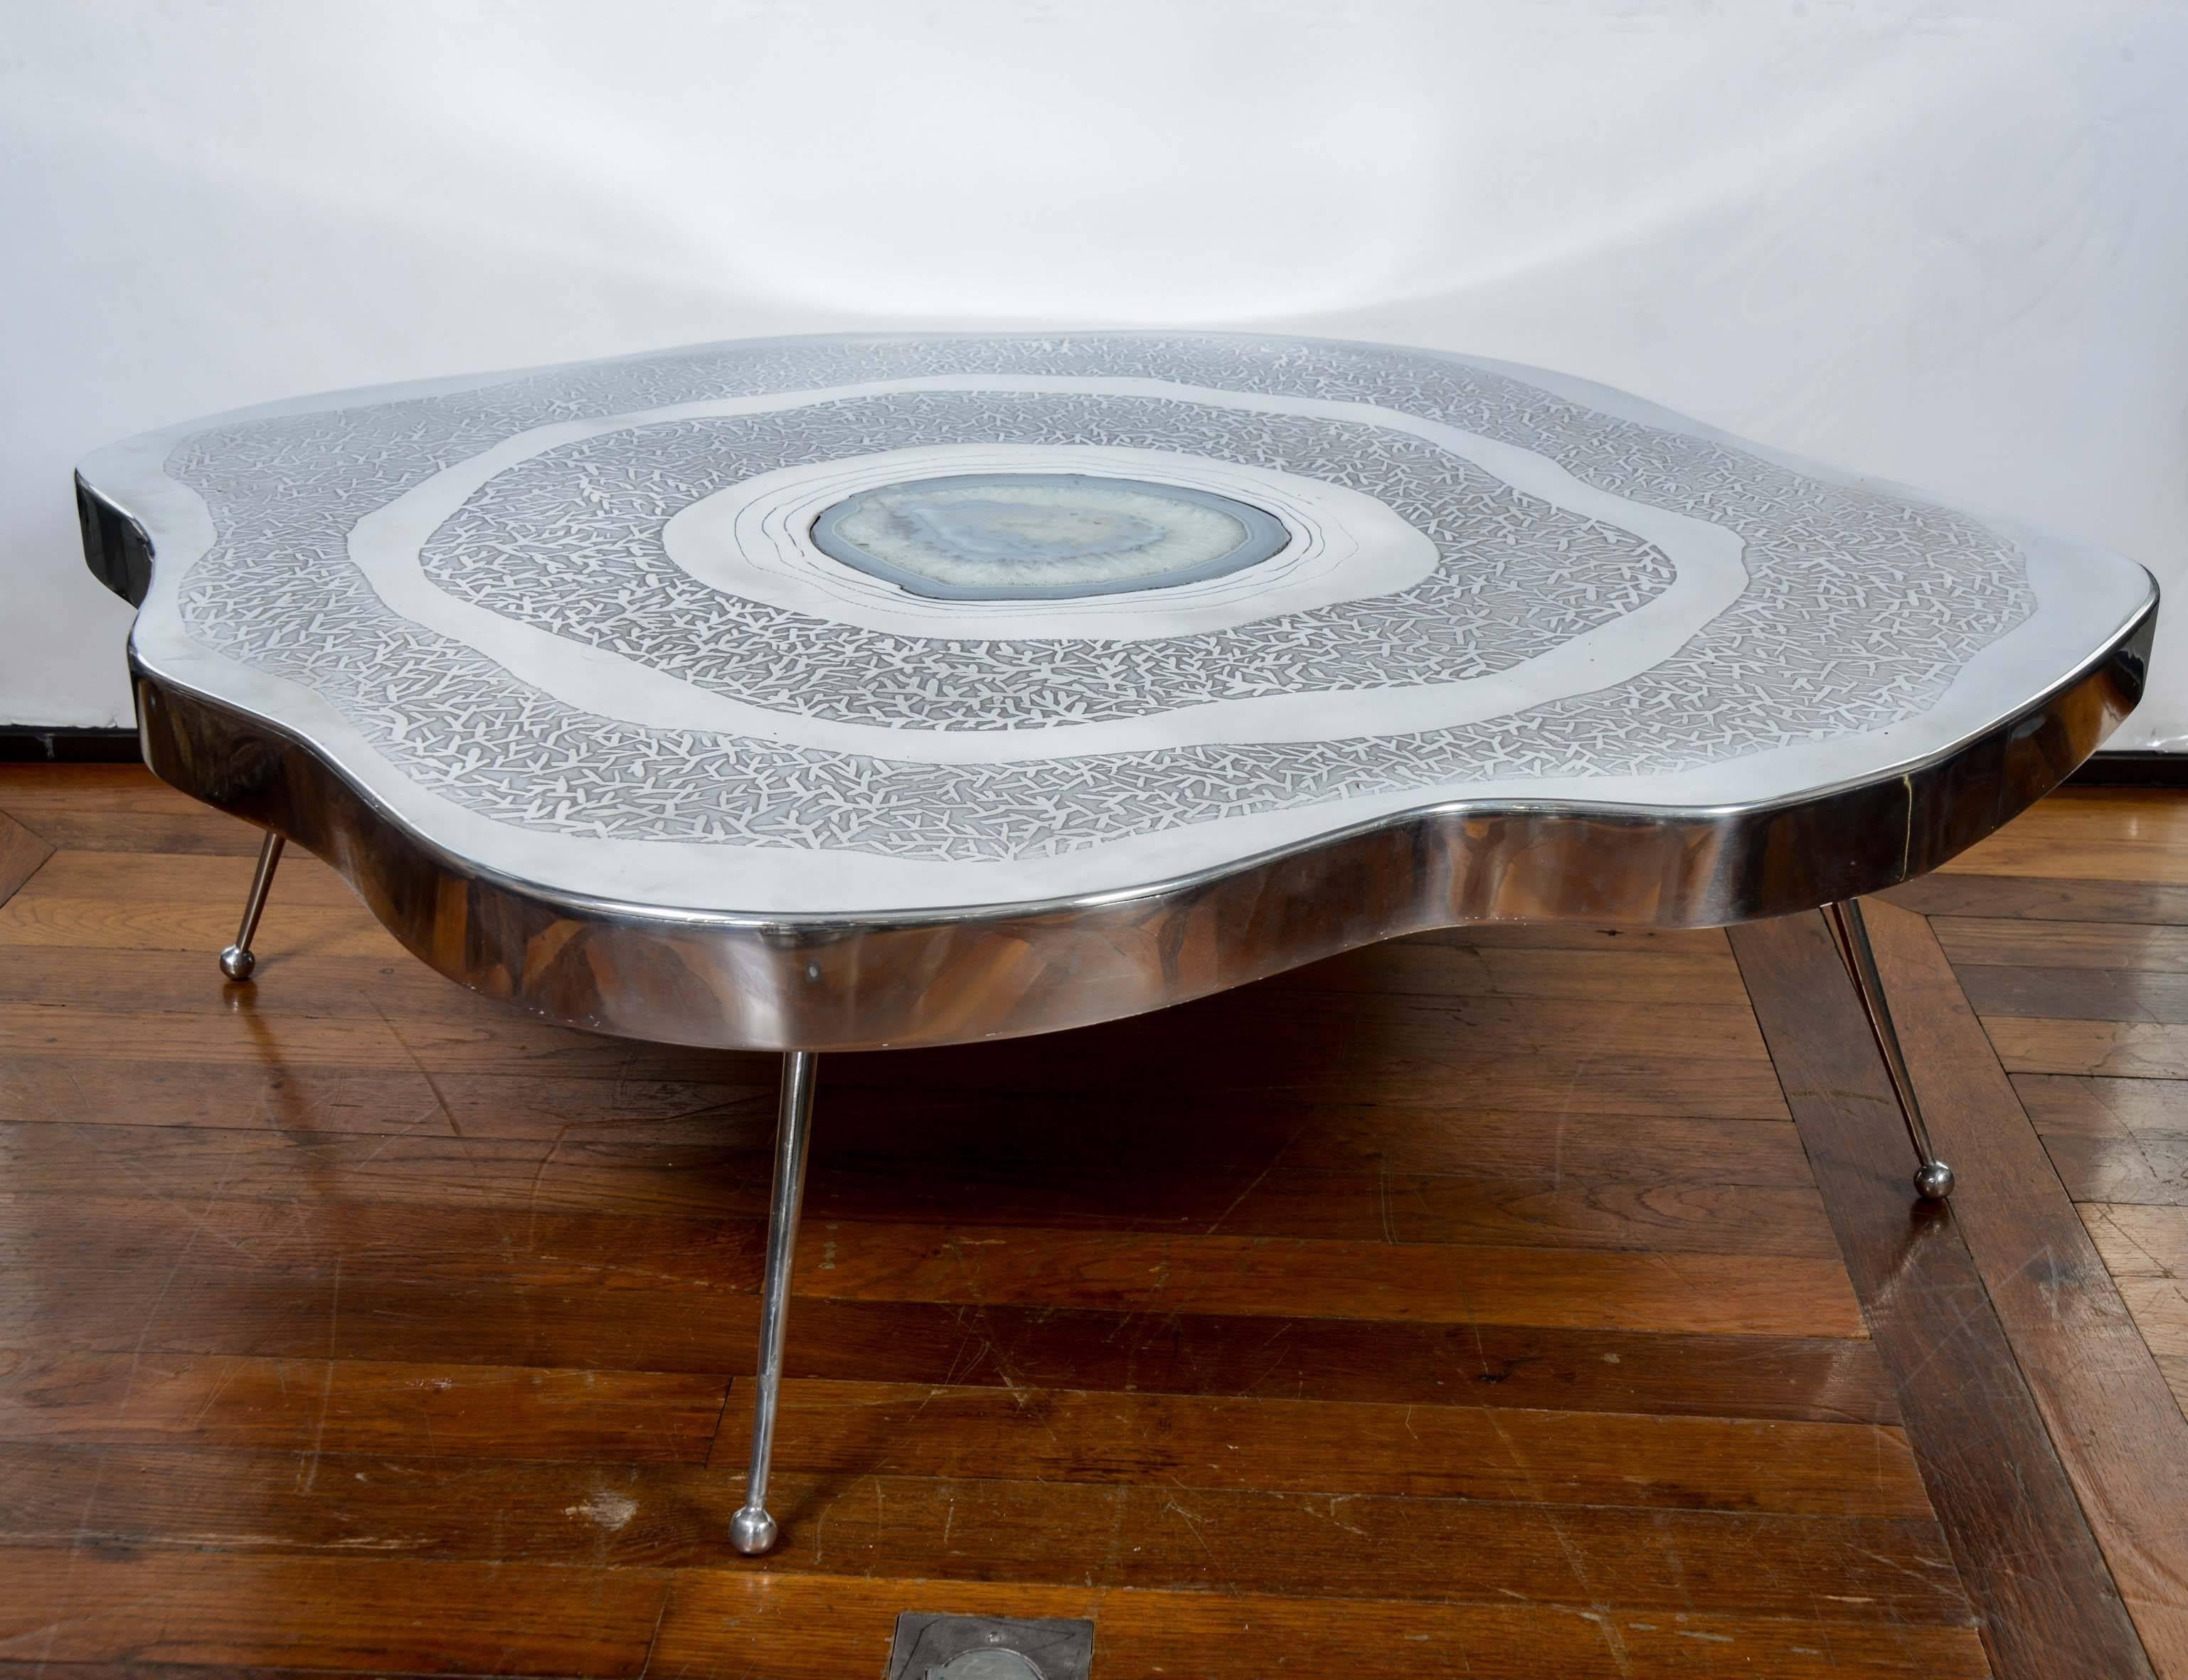 Low table with a cloud shape, engraved aluminium and agate, four metal feet. Creation by Galerie Glustin.